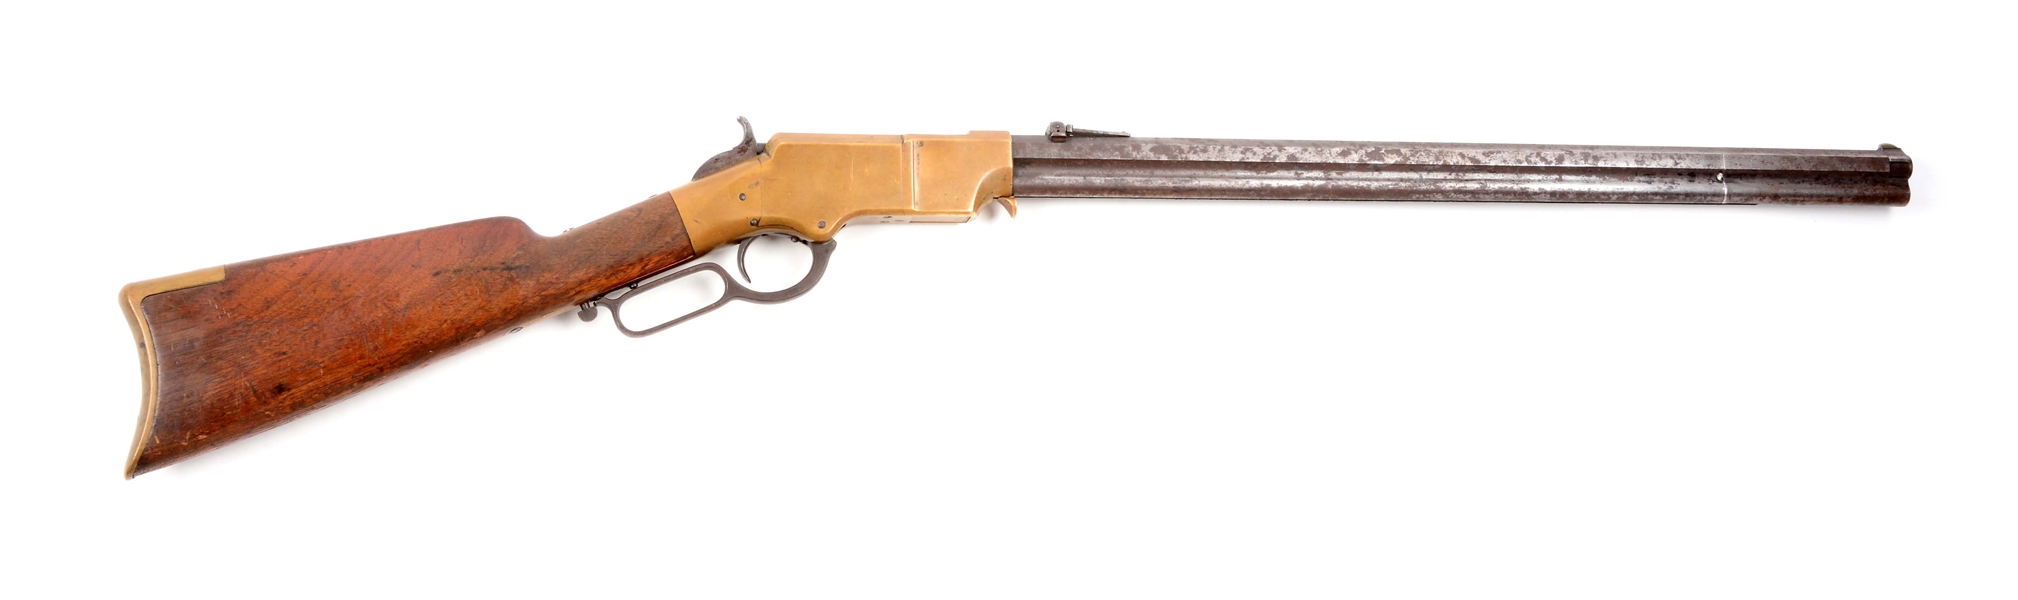 (A) JAMES B. HUMES HISTORICAL HENRY LEVER ACTION RIFLE (ASSOCIATED WITH CAPTURE OF BLACK BART).